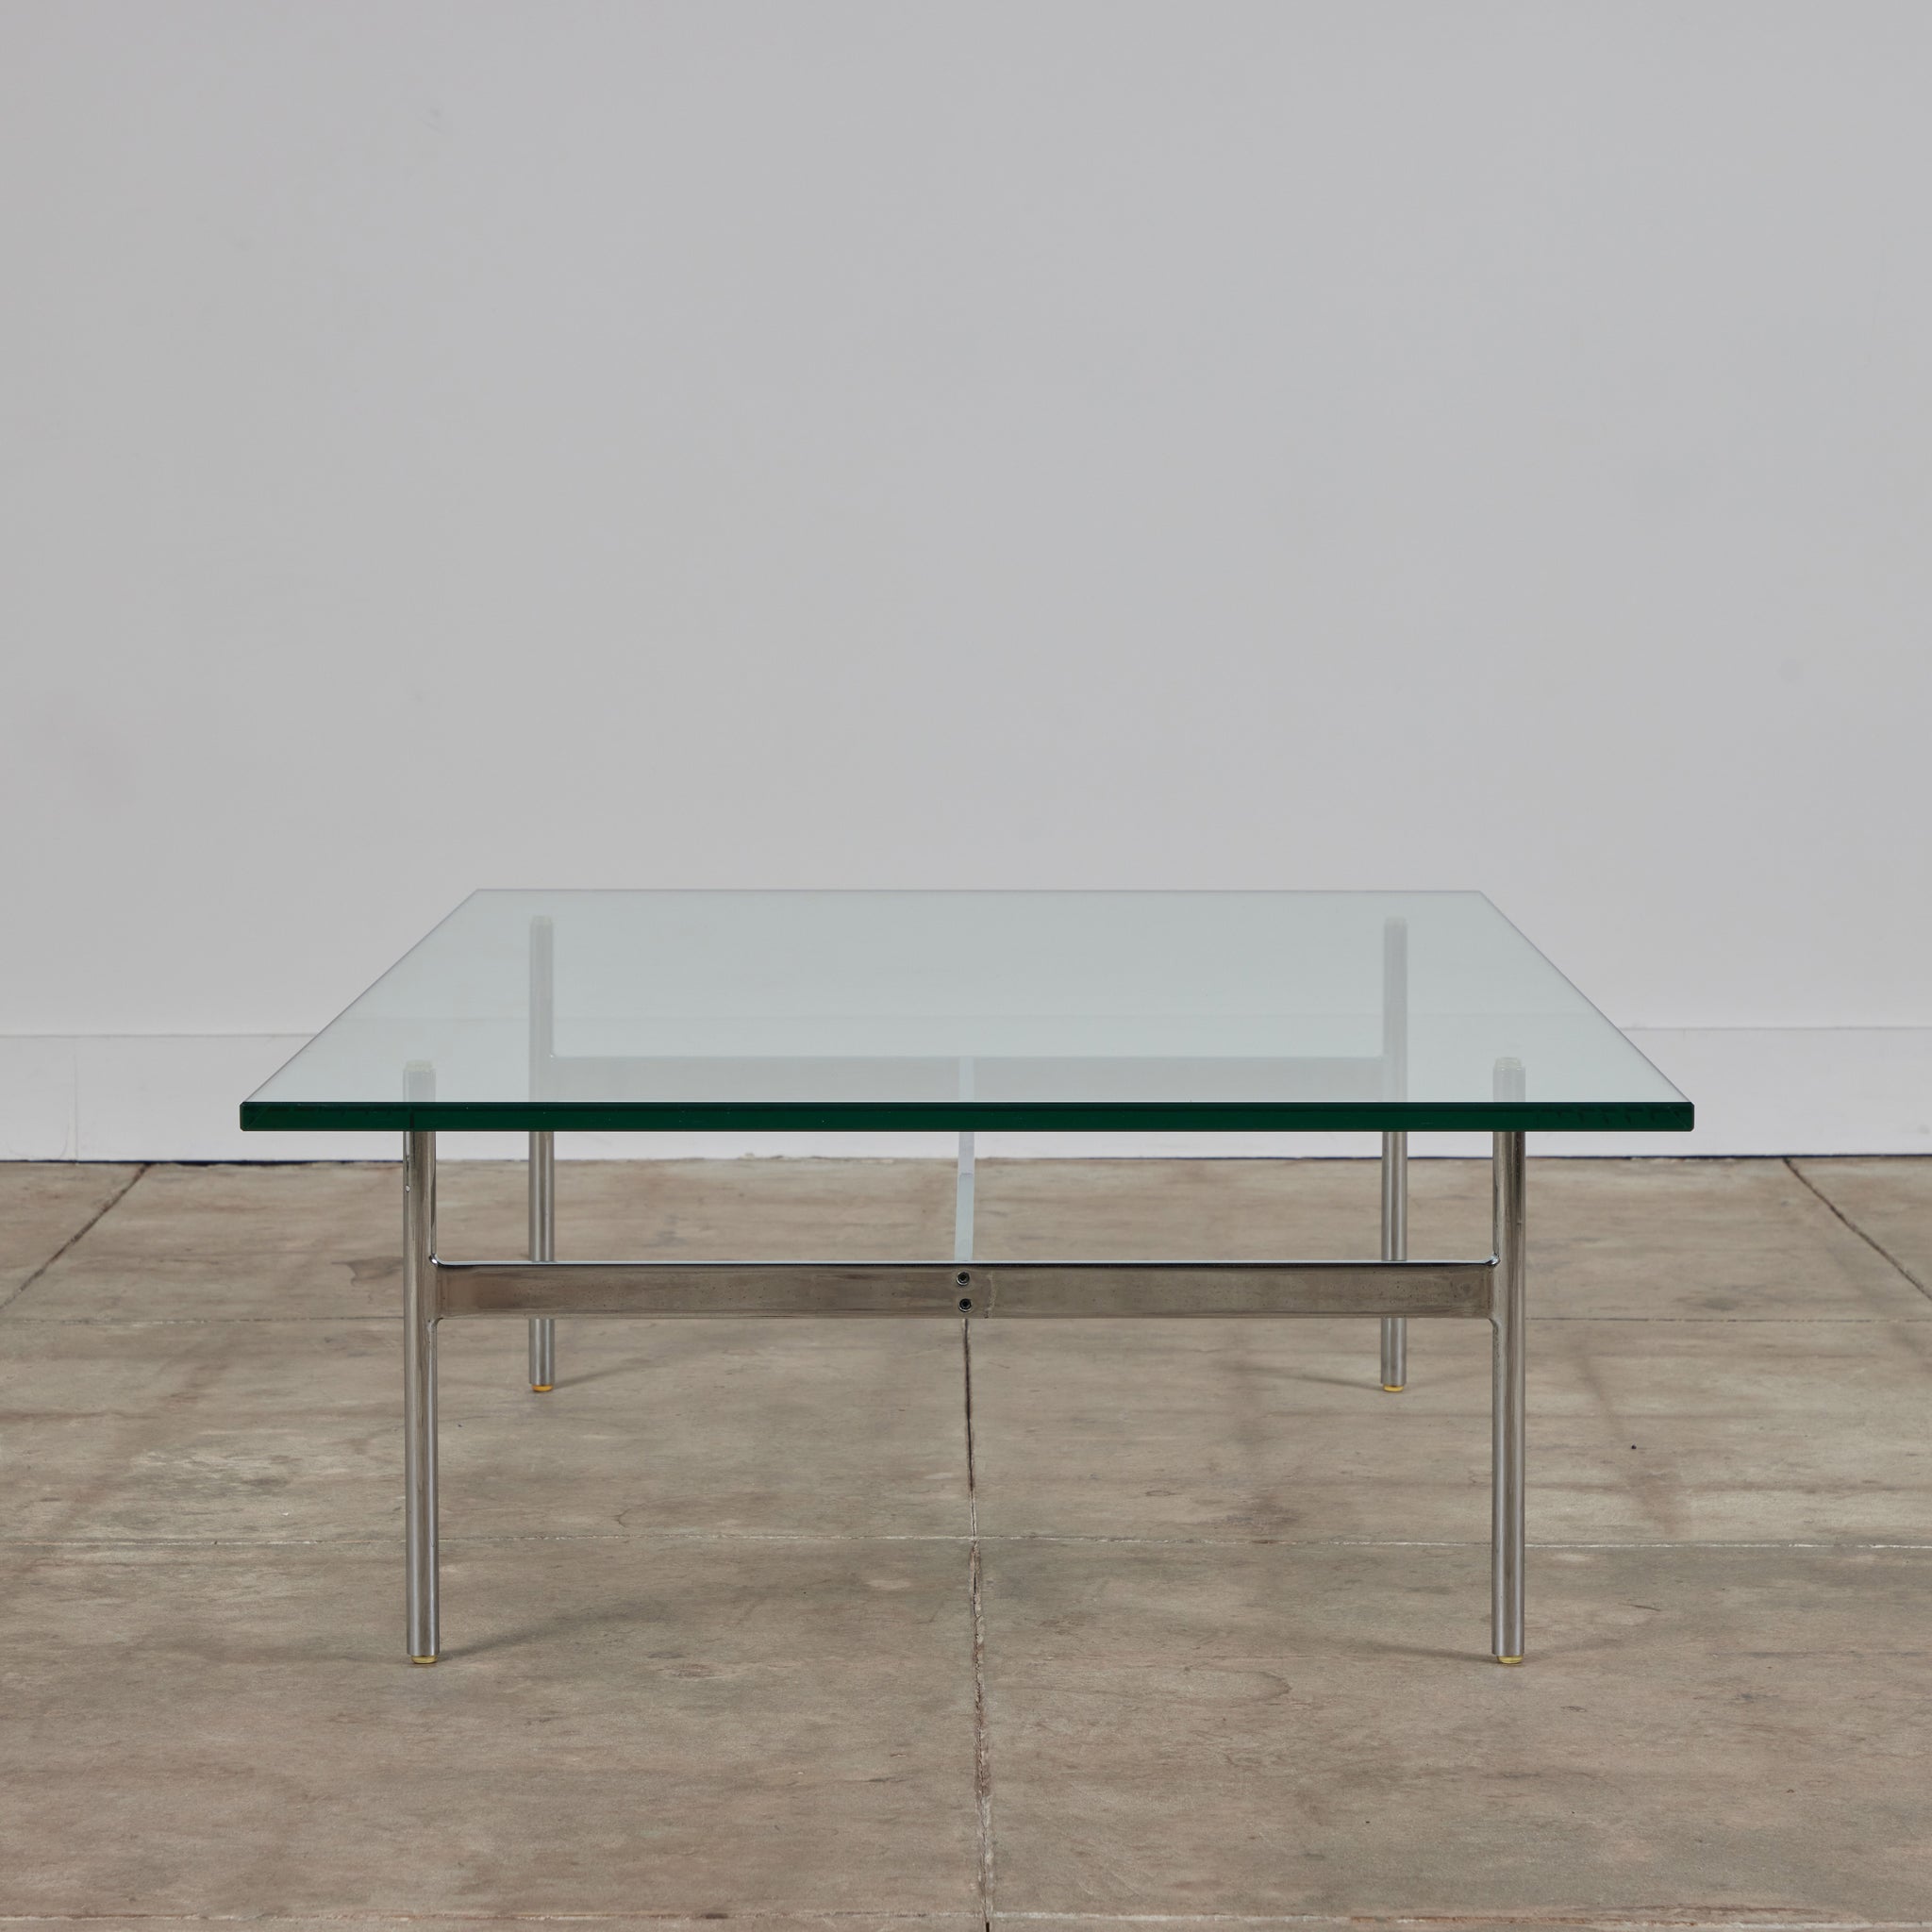 Gerald McCabe "H" Series Coffee Table for Eon Furniture